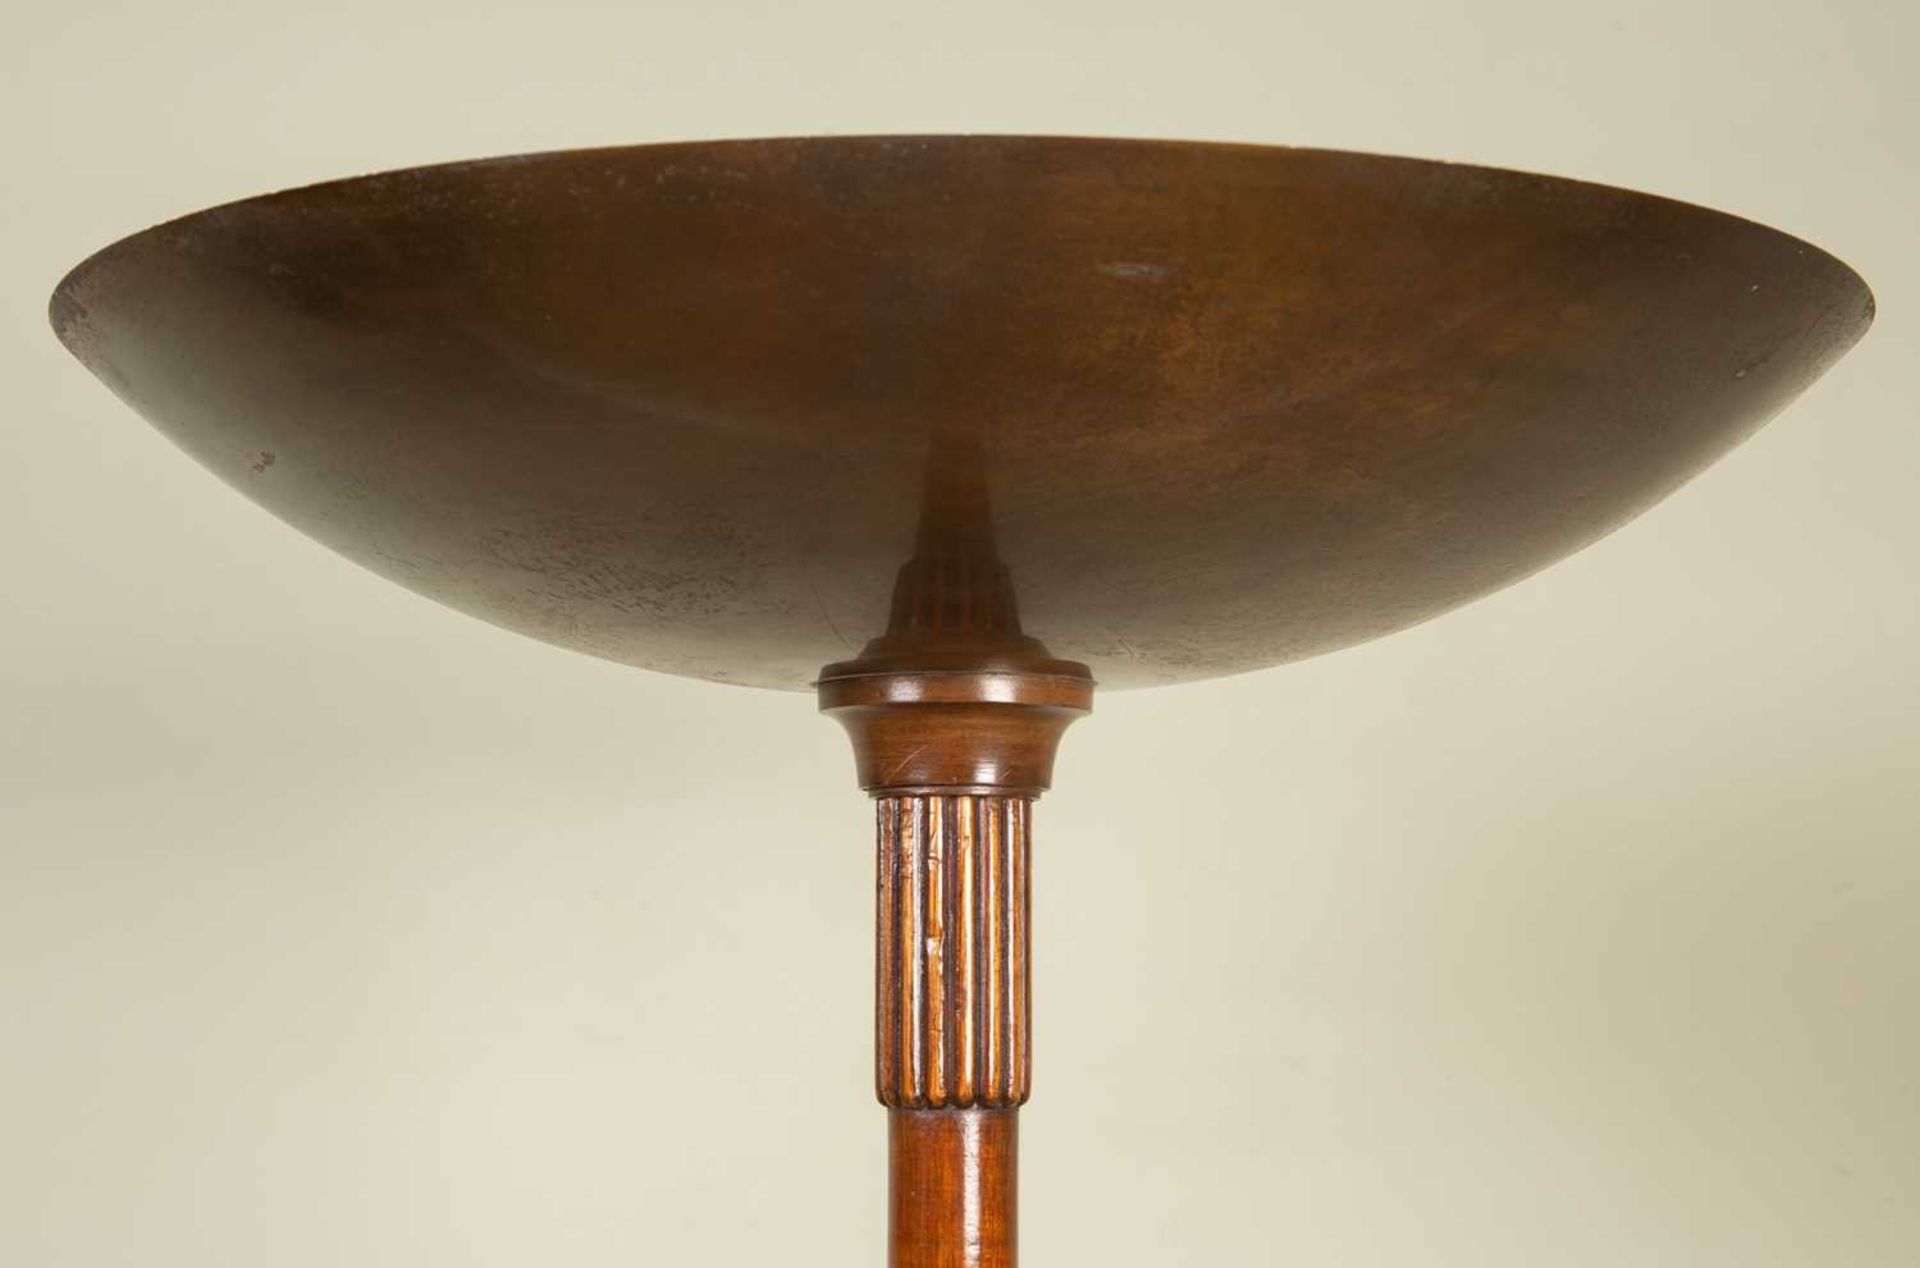 An Art Deco mahogany and brass floor standing uplighter with dish top on a slender column support - Image 2 of 4